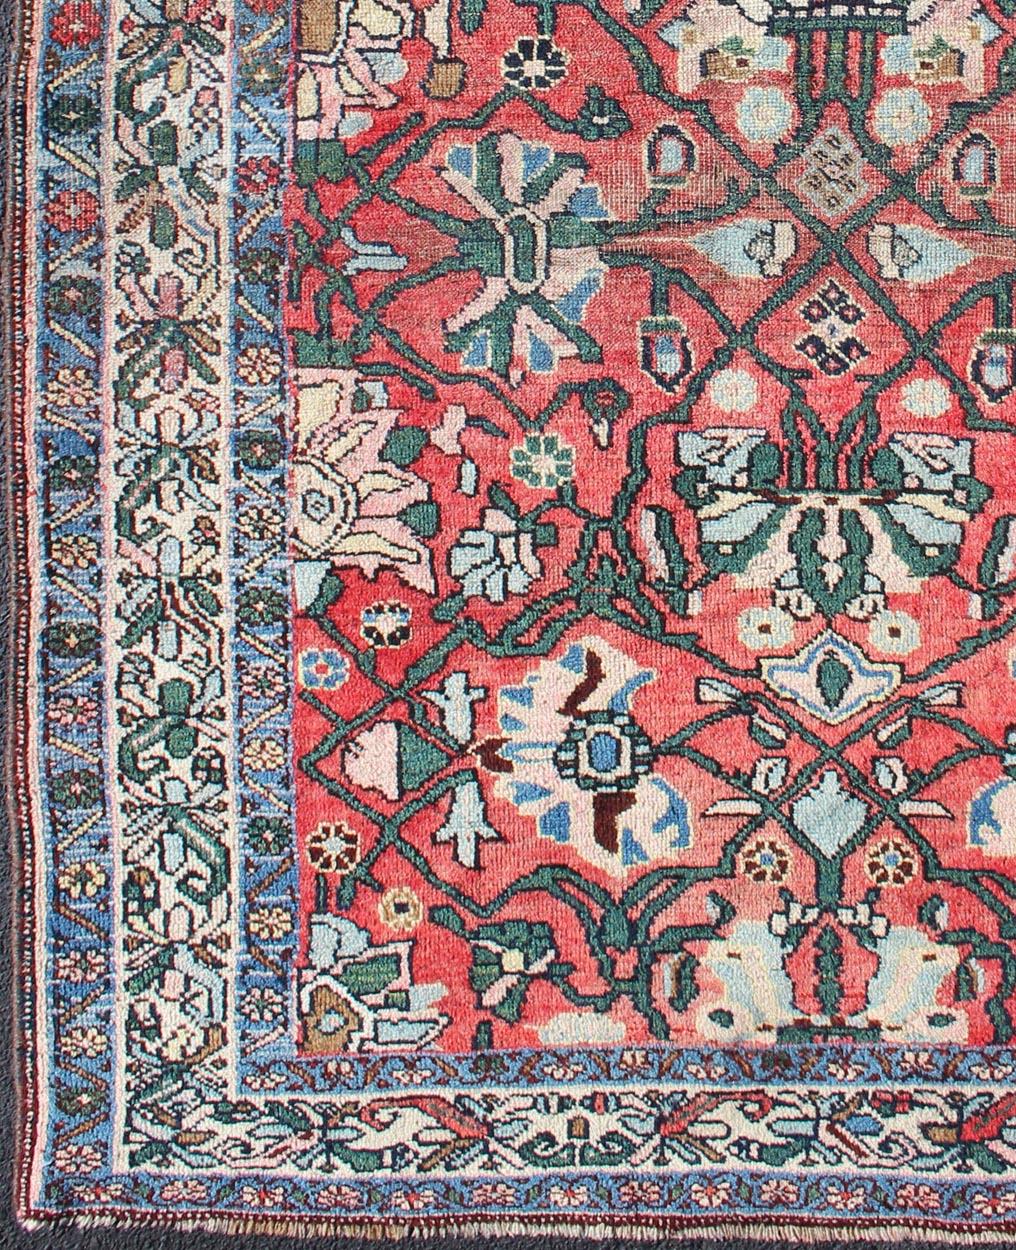 Tribal Antique Persian Bidjar Rug with Large Floral Motifs in Soft Red, Green & Blue For Sale